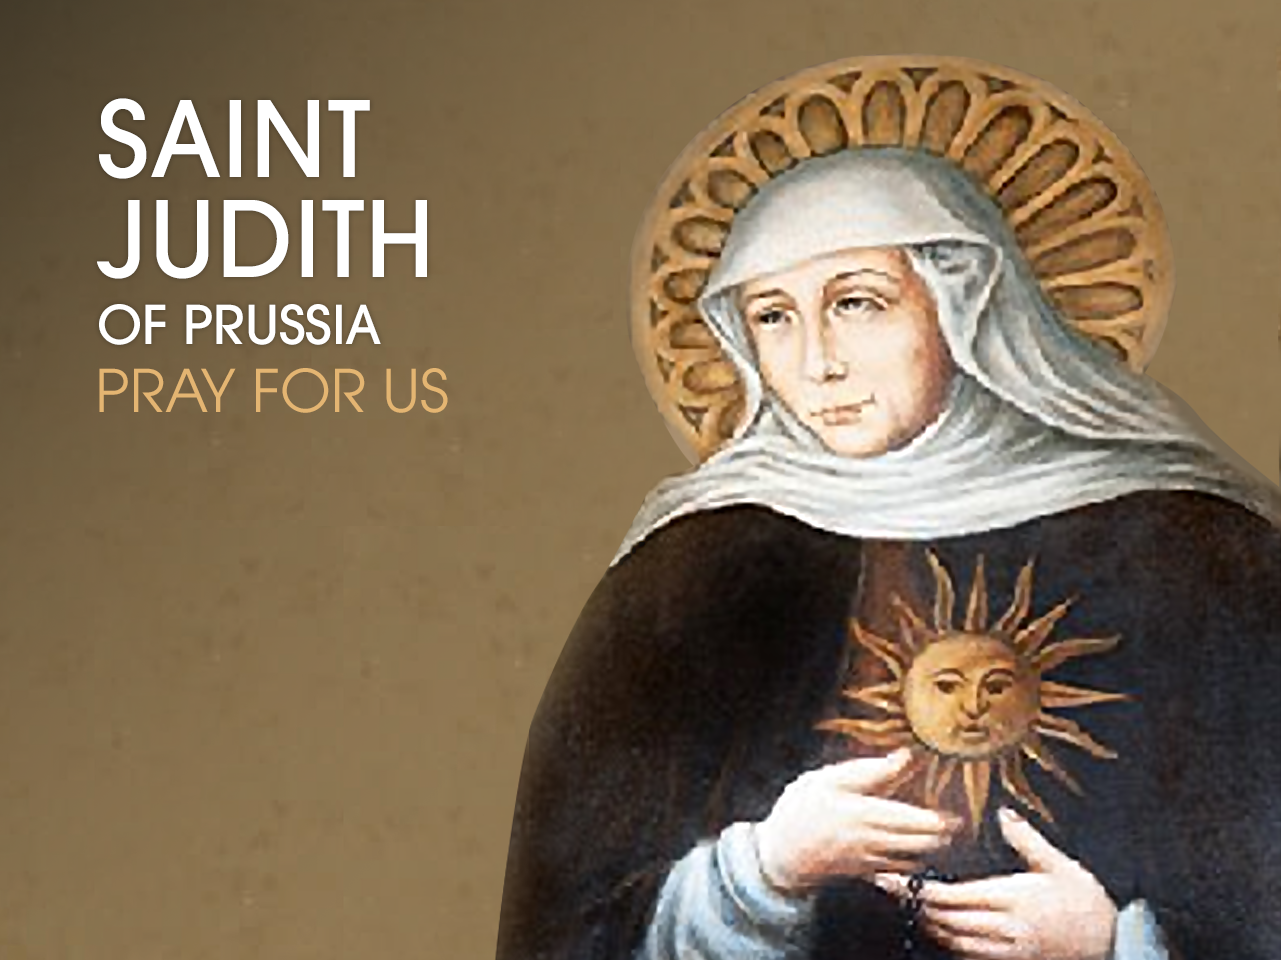 St. Judith of Prussia